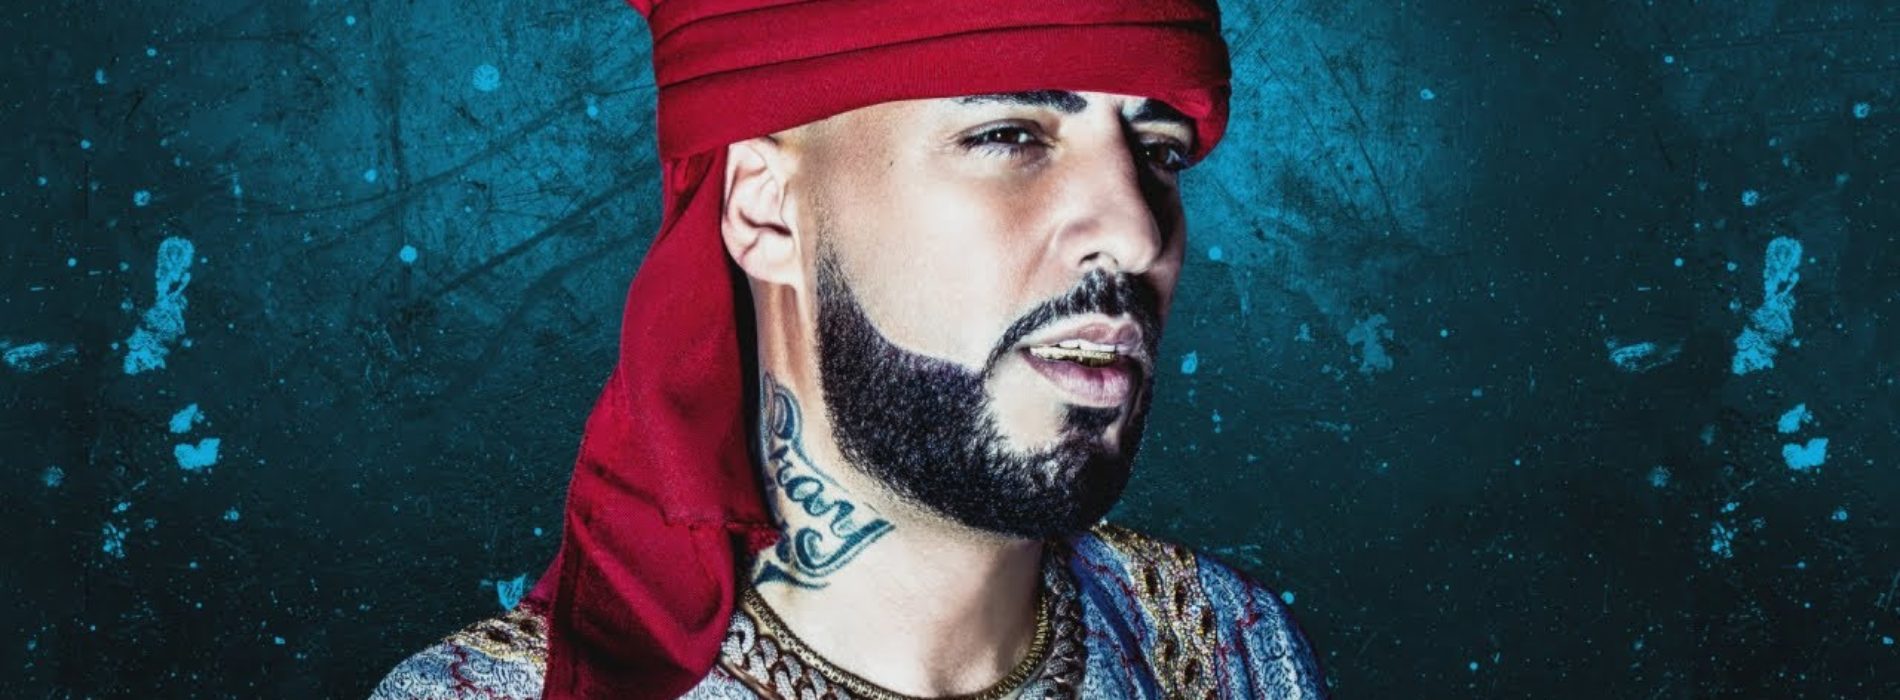 9 titres de French Montana – Salam Alaykum /  Say Goodbye /  Saucy / Out Of Your Mind Feat. Swae Lee & Chris Brown /  50’s & 100’s ft. Juicy J /  Hoop ft. Quavo / Wanna Be / Montana – (Audio)